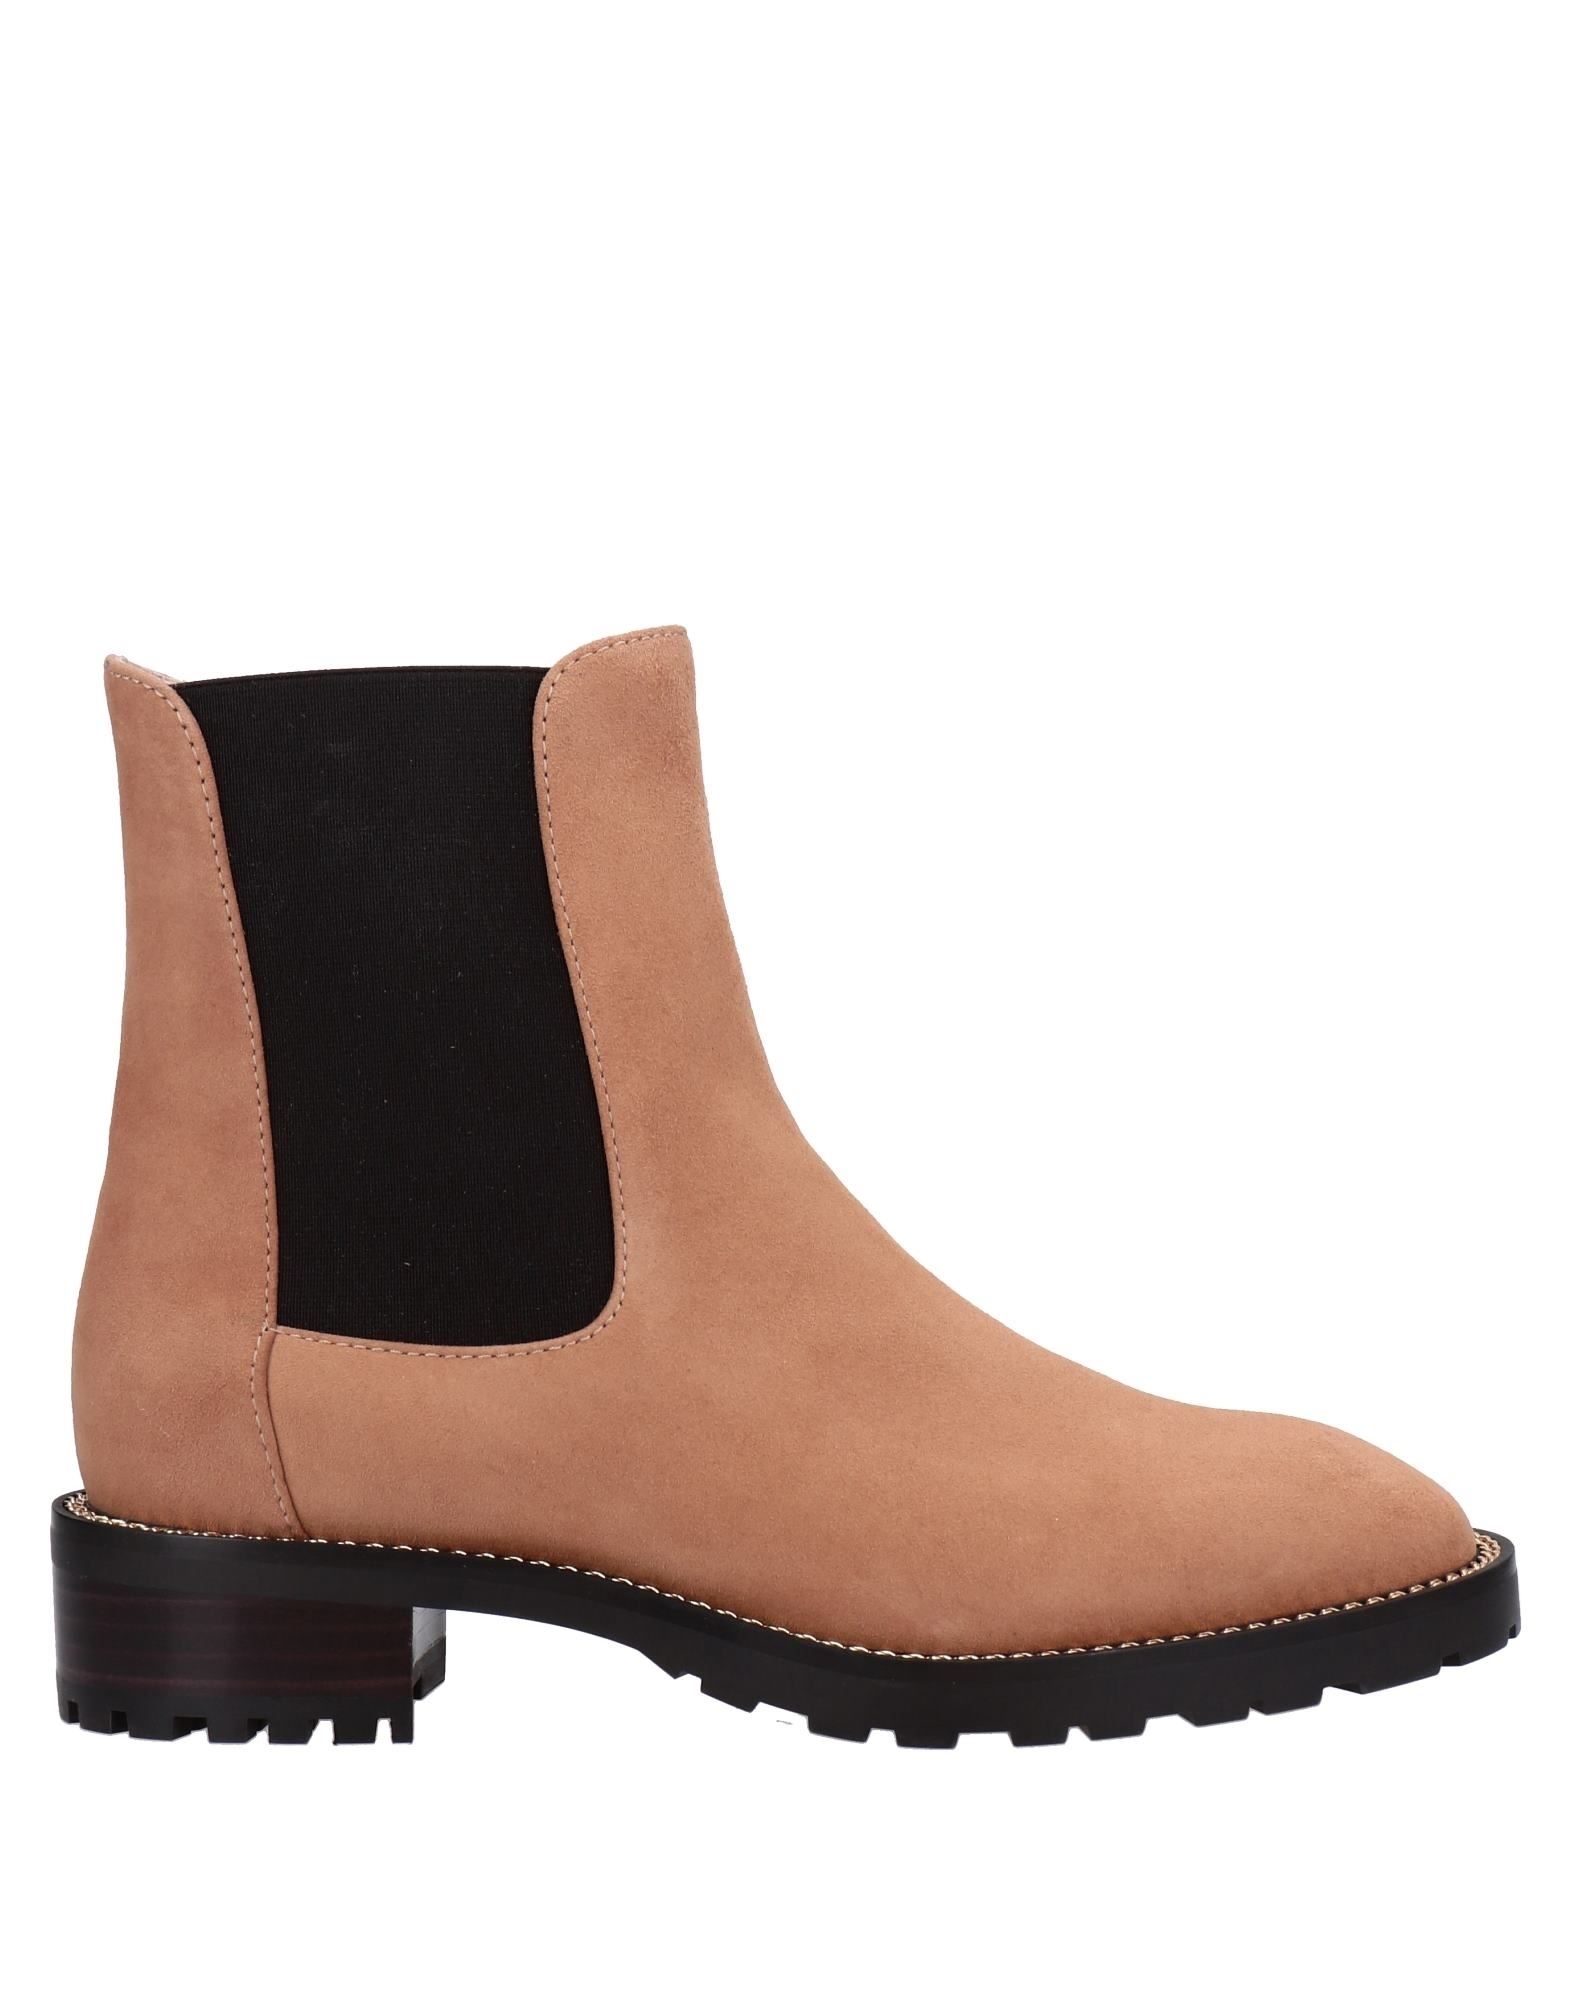 Stuart Weitzman Ankle Boots In Camel